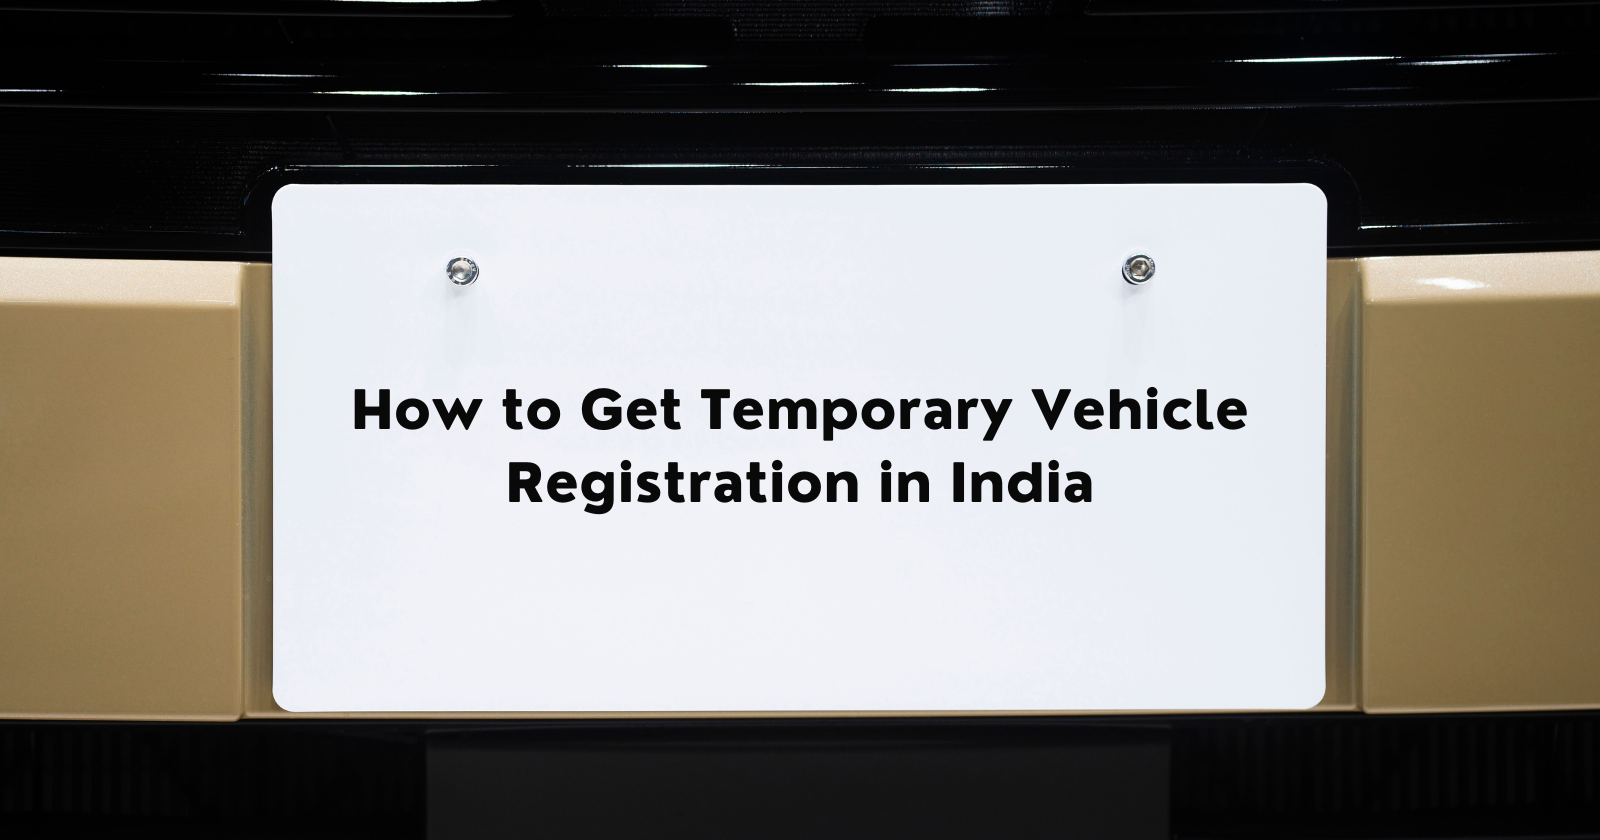 How to Get Temporary Vehicle Registration in India